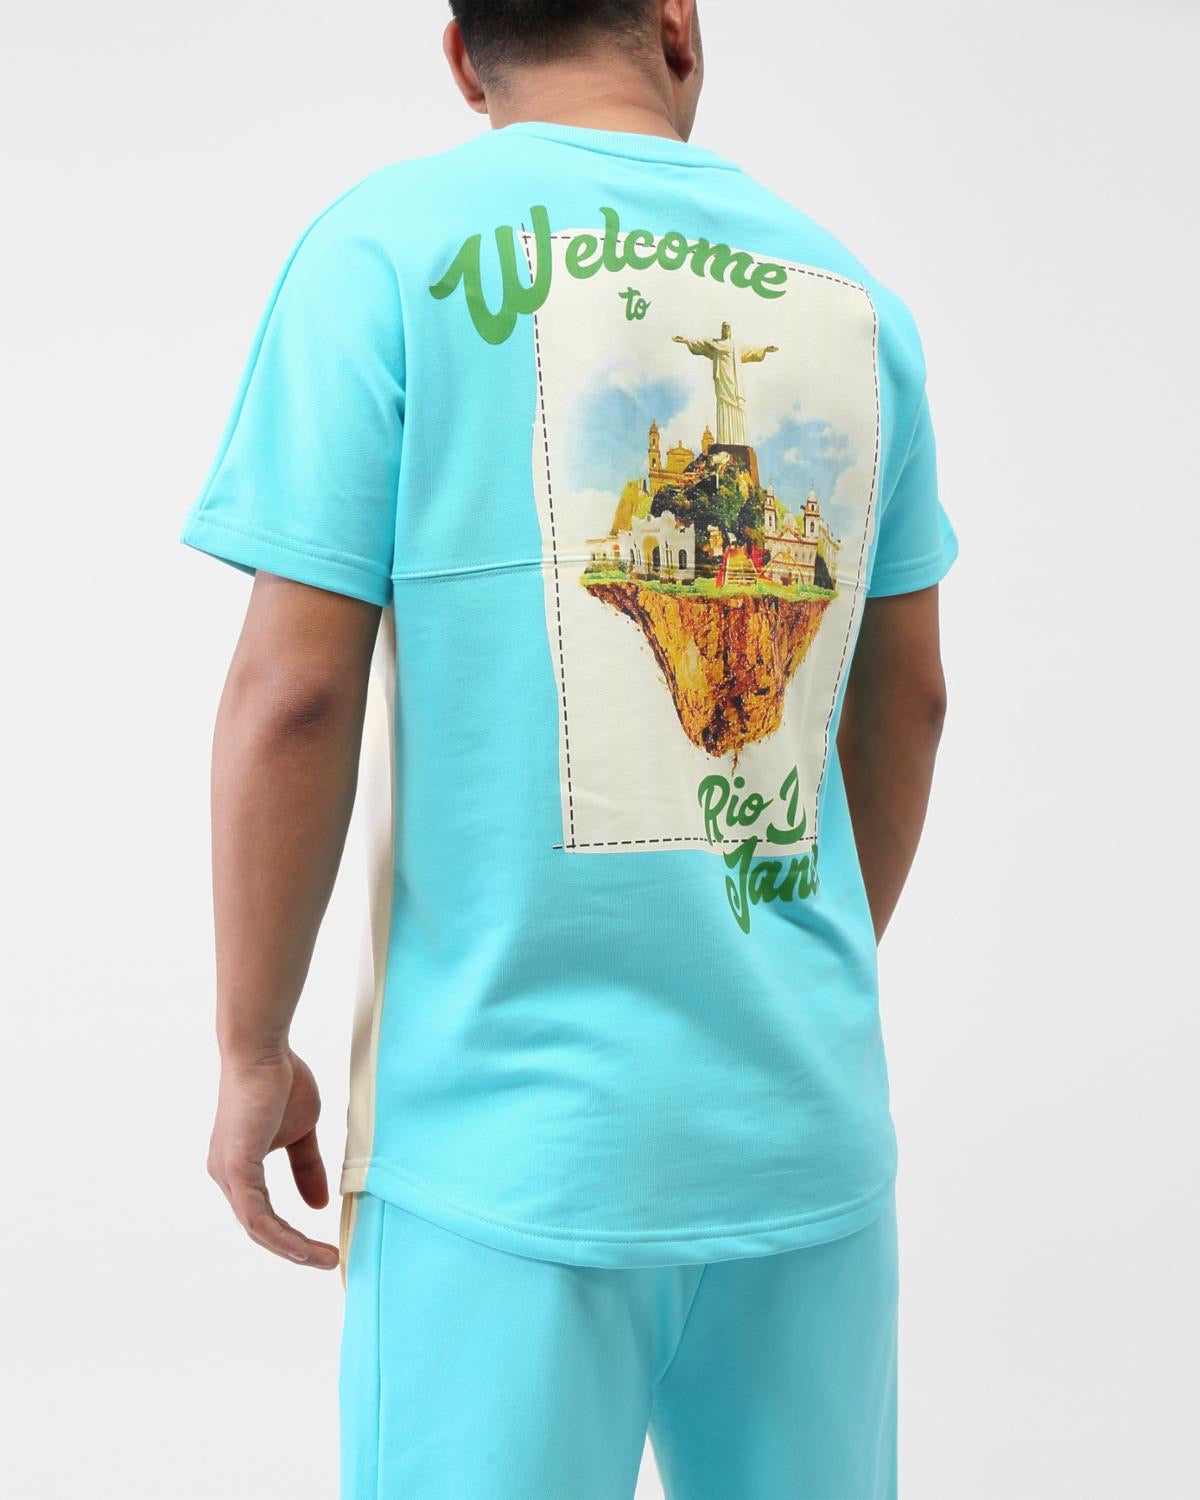 Hudson-Welcome To Rio-Lt-Blue-H3052639